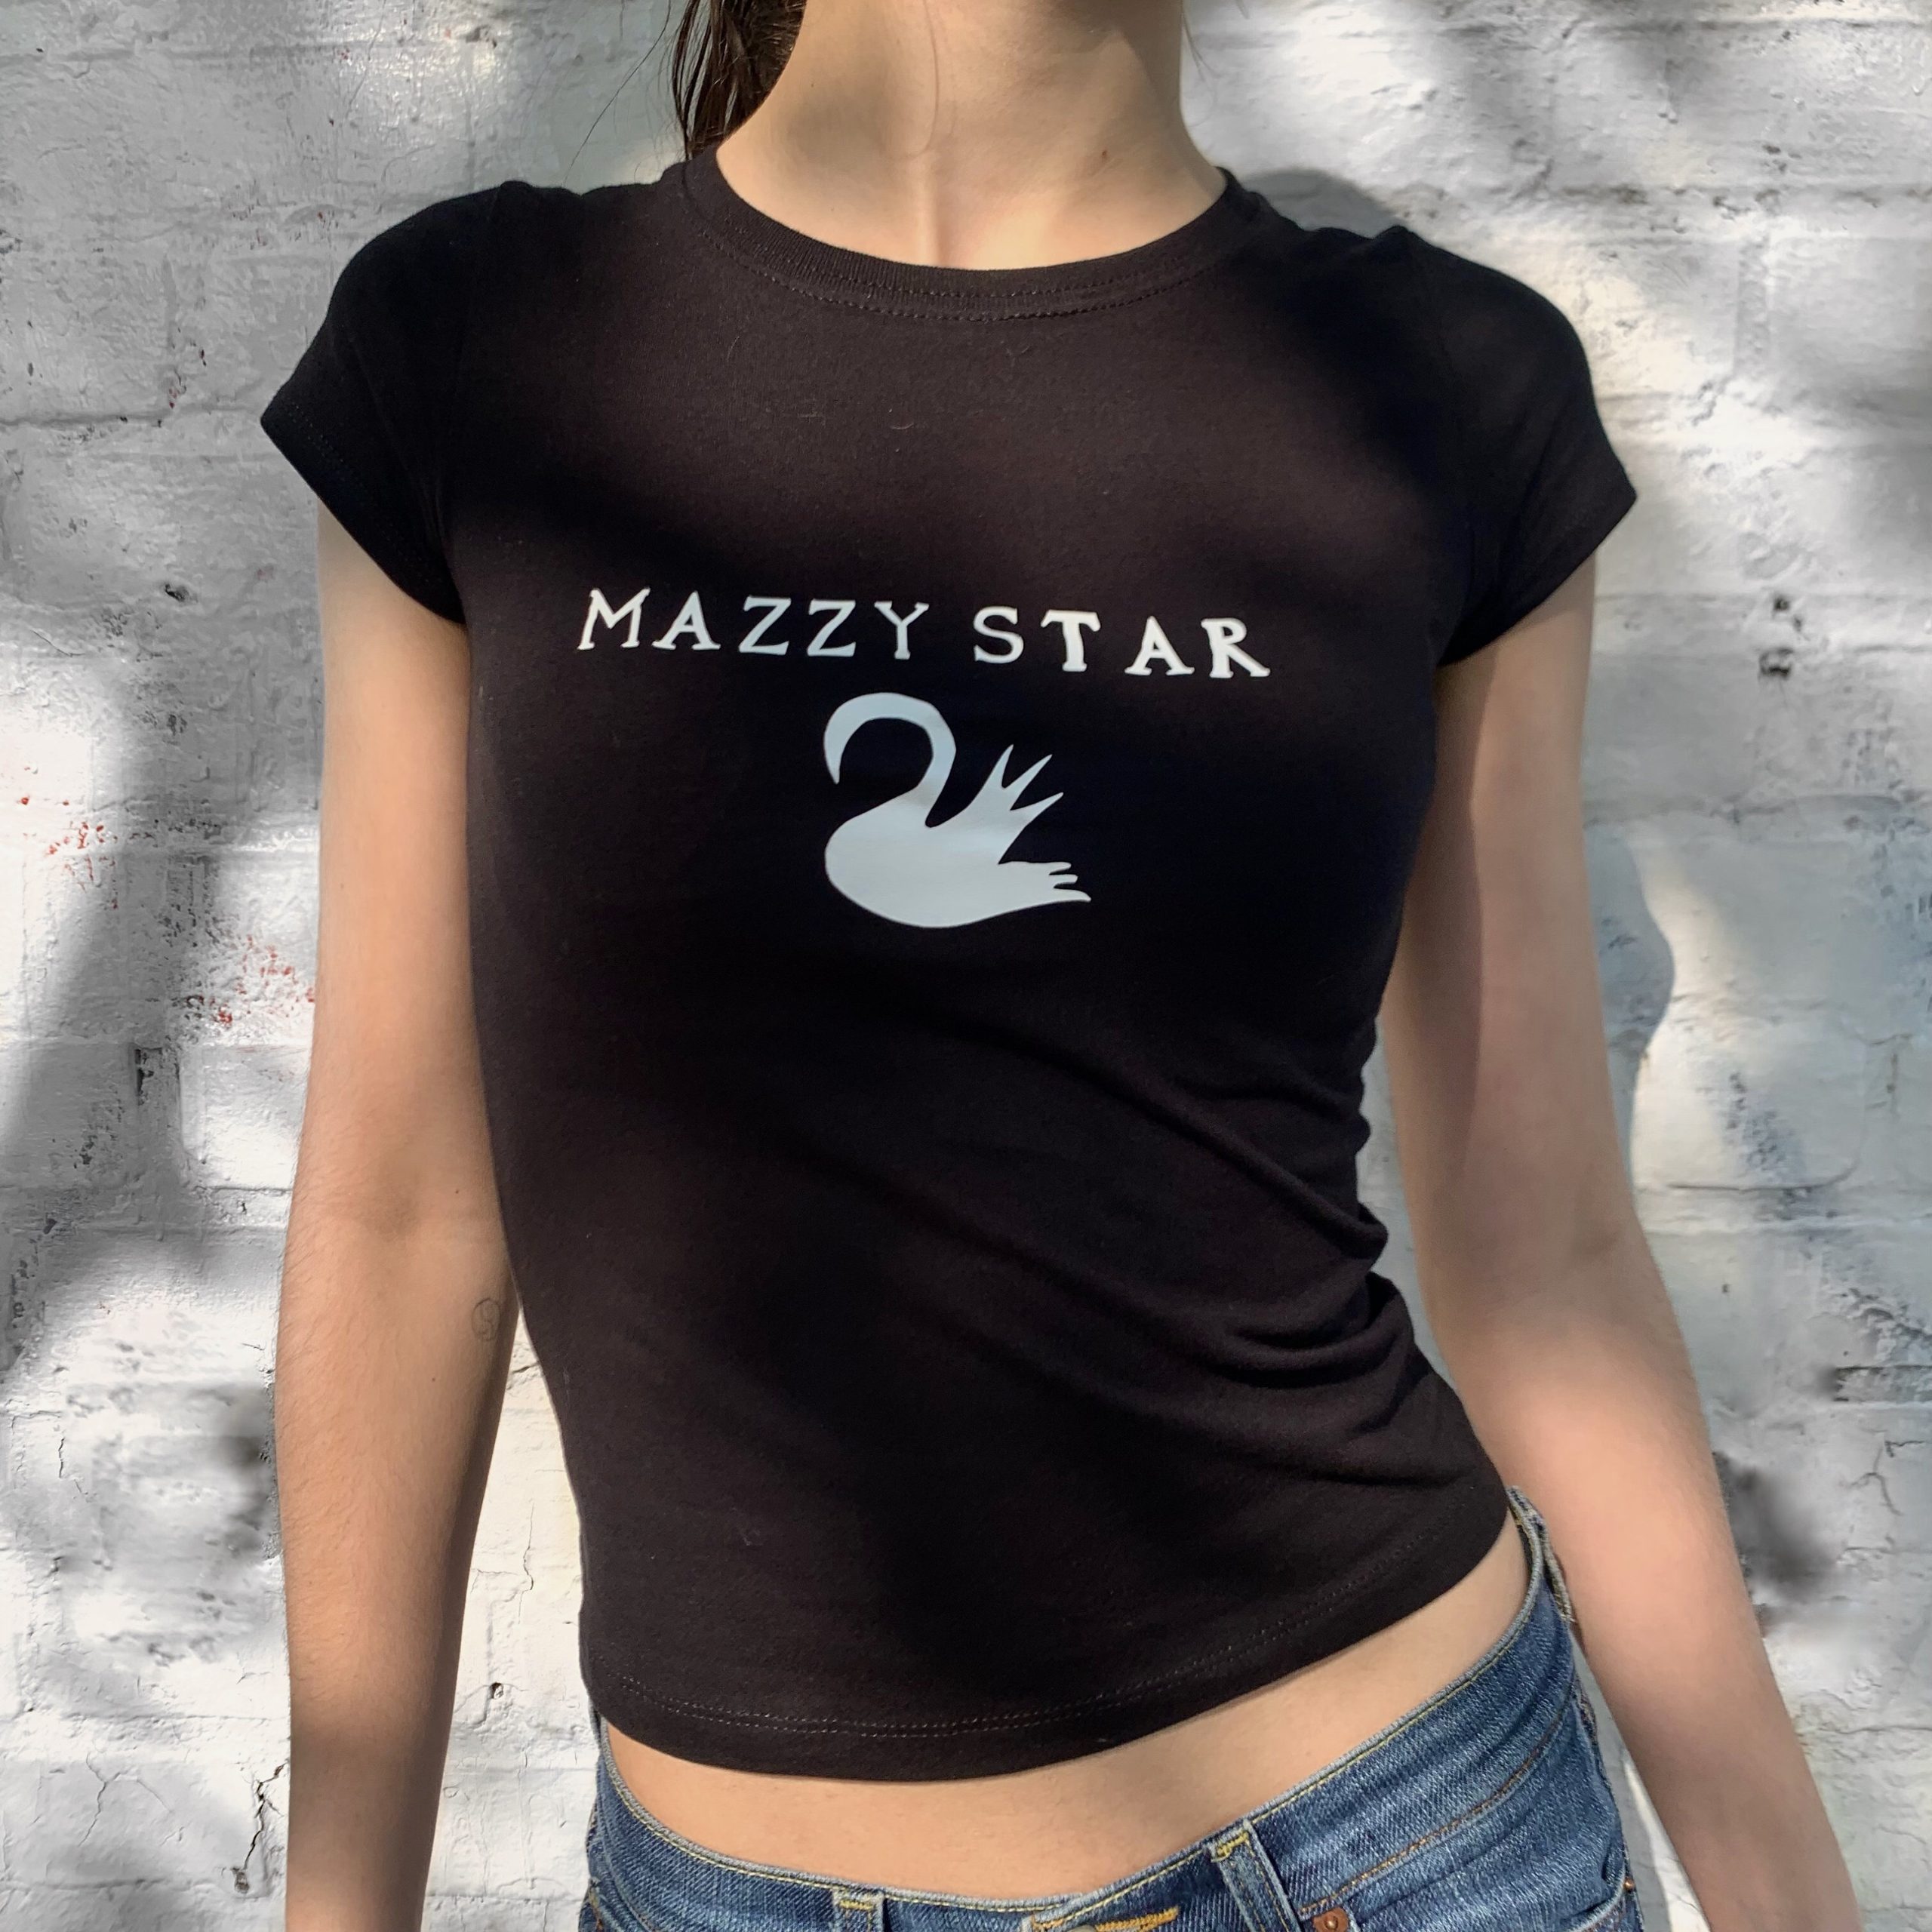 Vintage-inspired Mazzy Star baby tee for Y2K fashion lovers